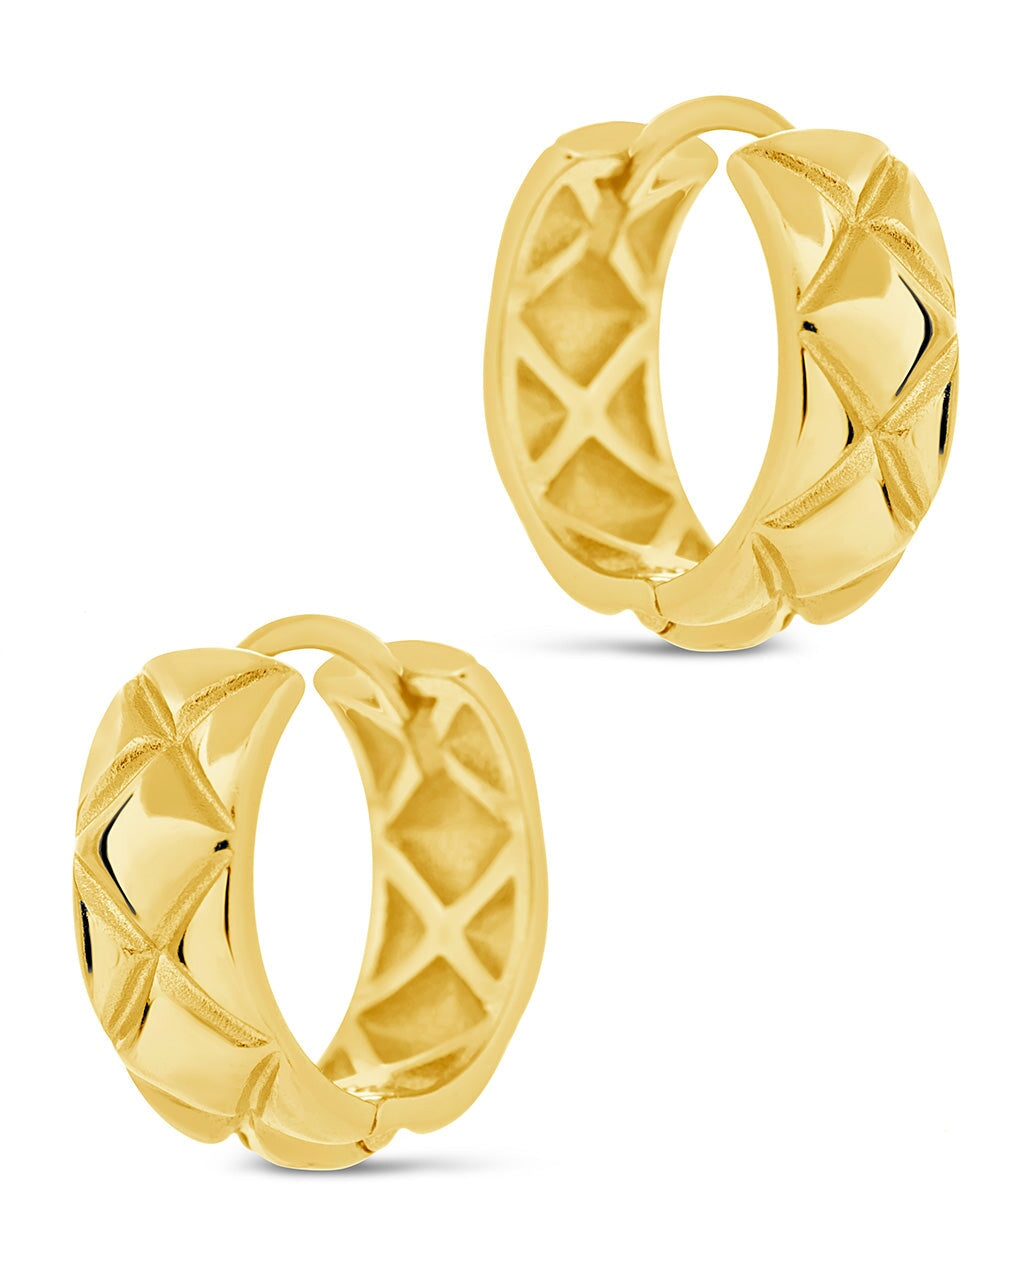 Chanel Coco Crush Hoop Earrings Quilted Motif, 18k White Gold, Diamonds  J12094 - JewelryReluxe